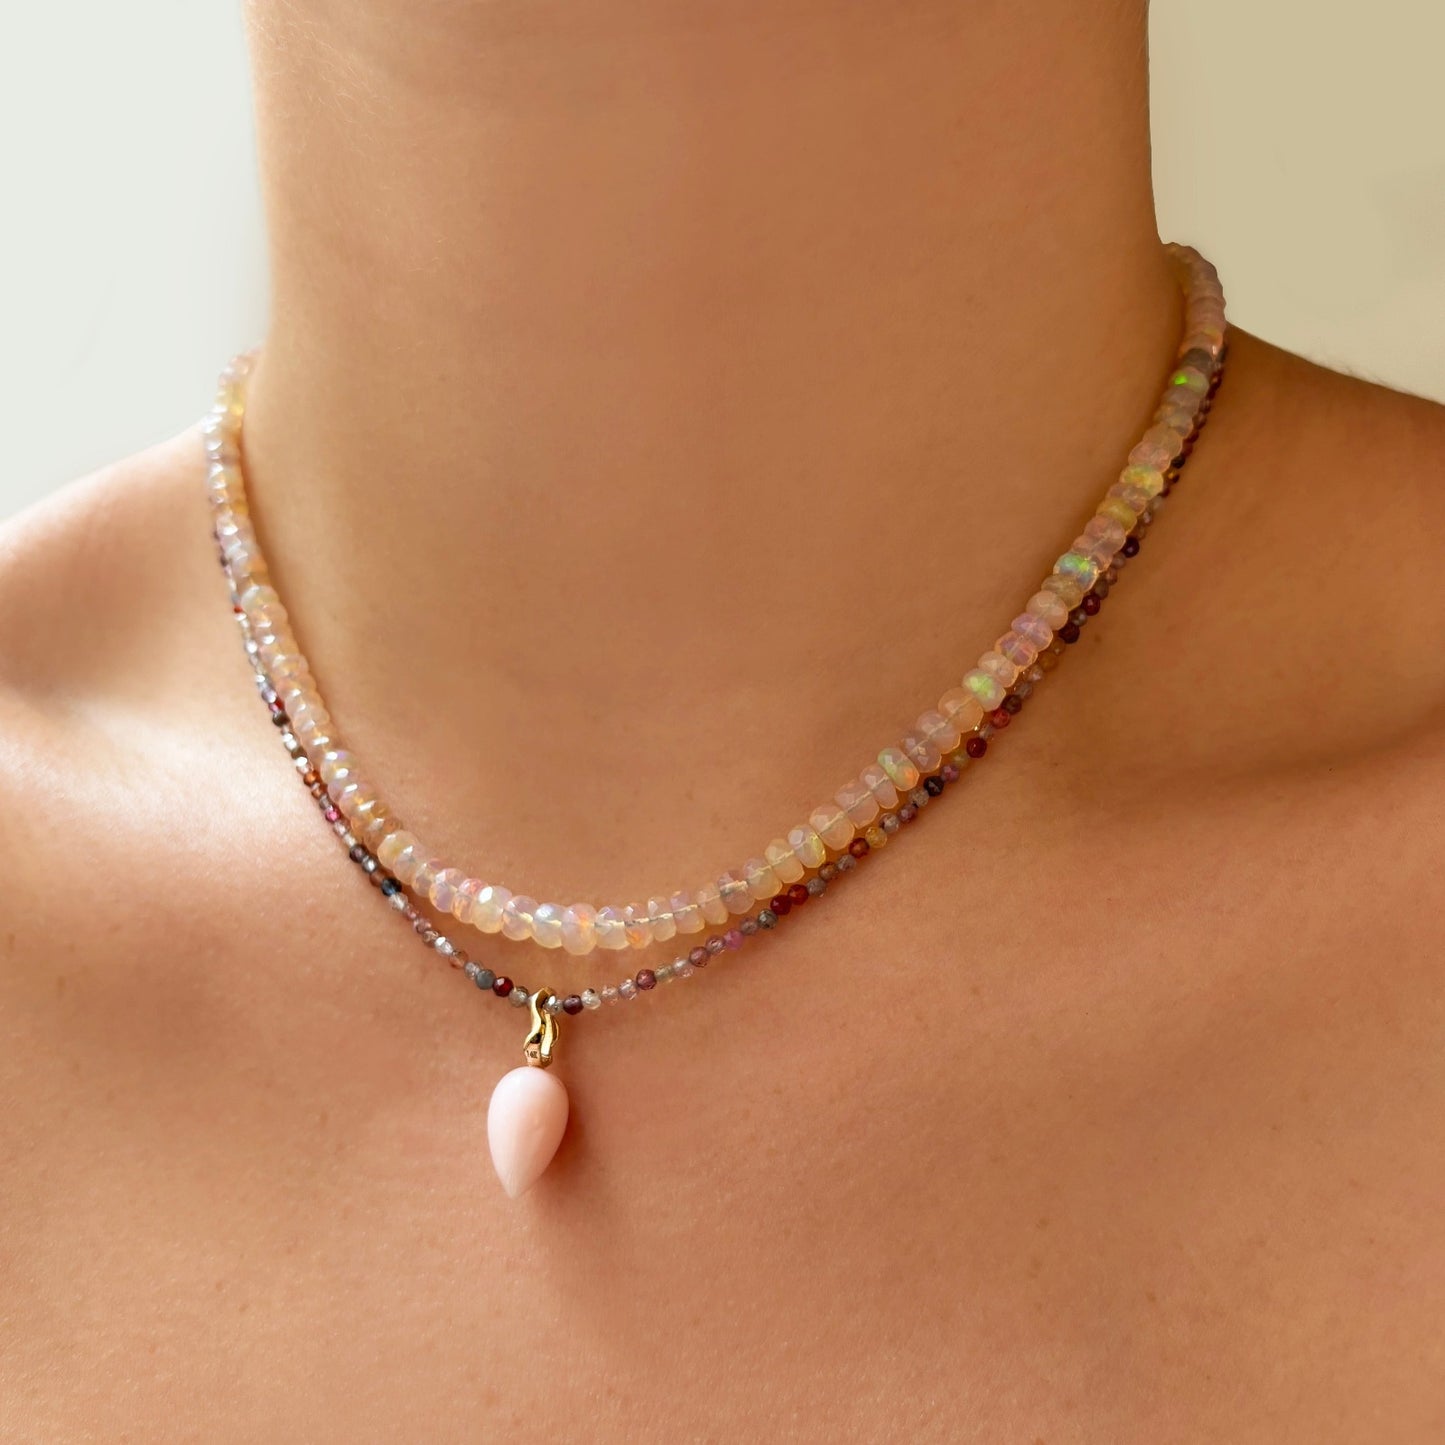 Peruvian pink opal acorn drop charm. Styled on a neck hanging from a beaded necklace.